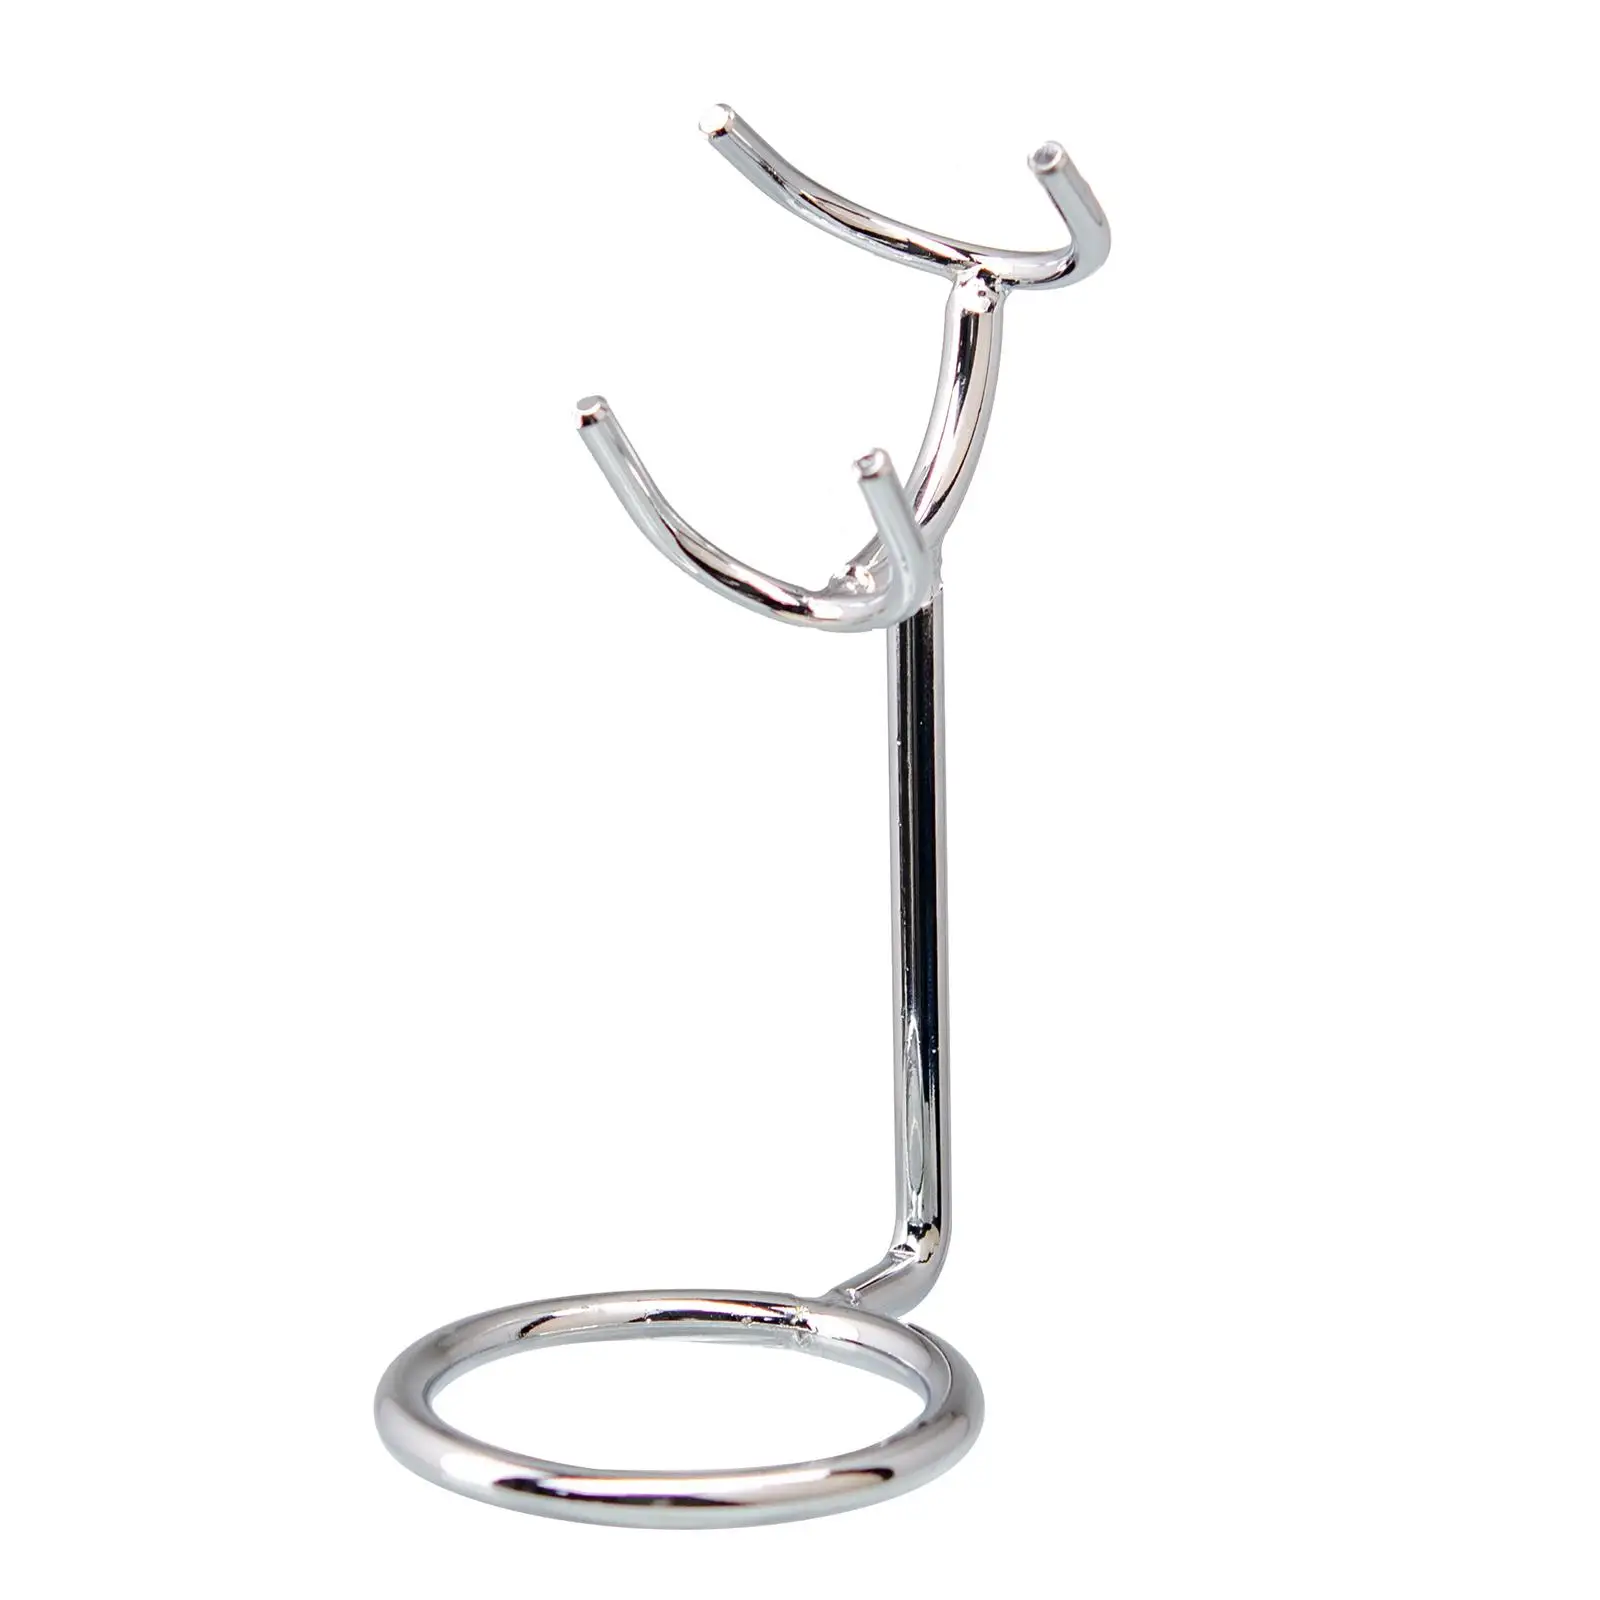 and Brush Stand Hanger Practical Not Rust Stable Shave Accessory Safety Holder for Man Salon Countertop